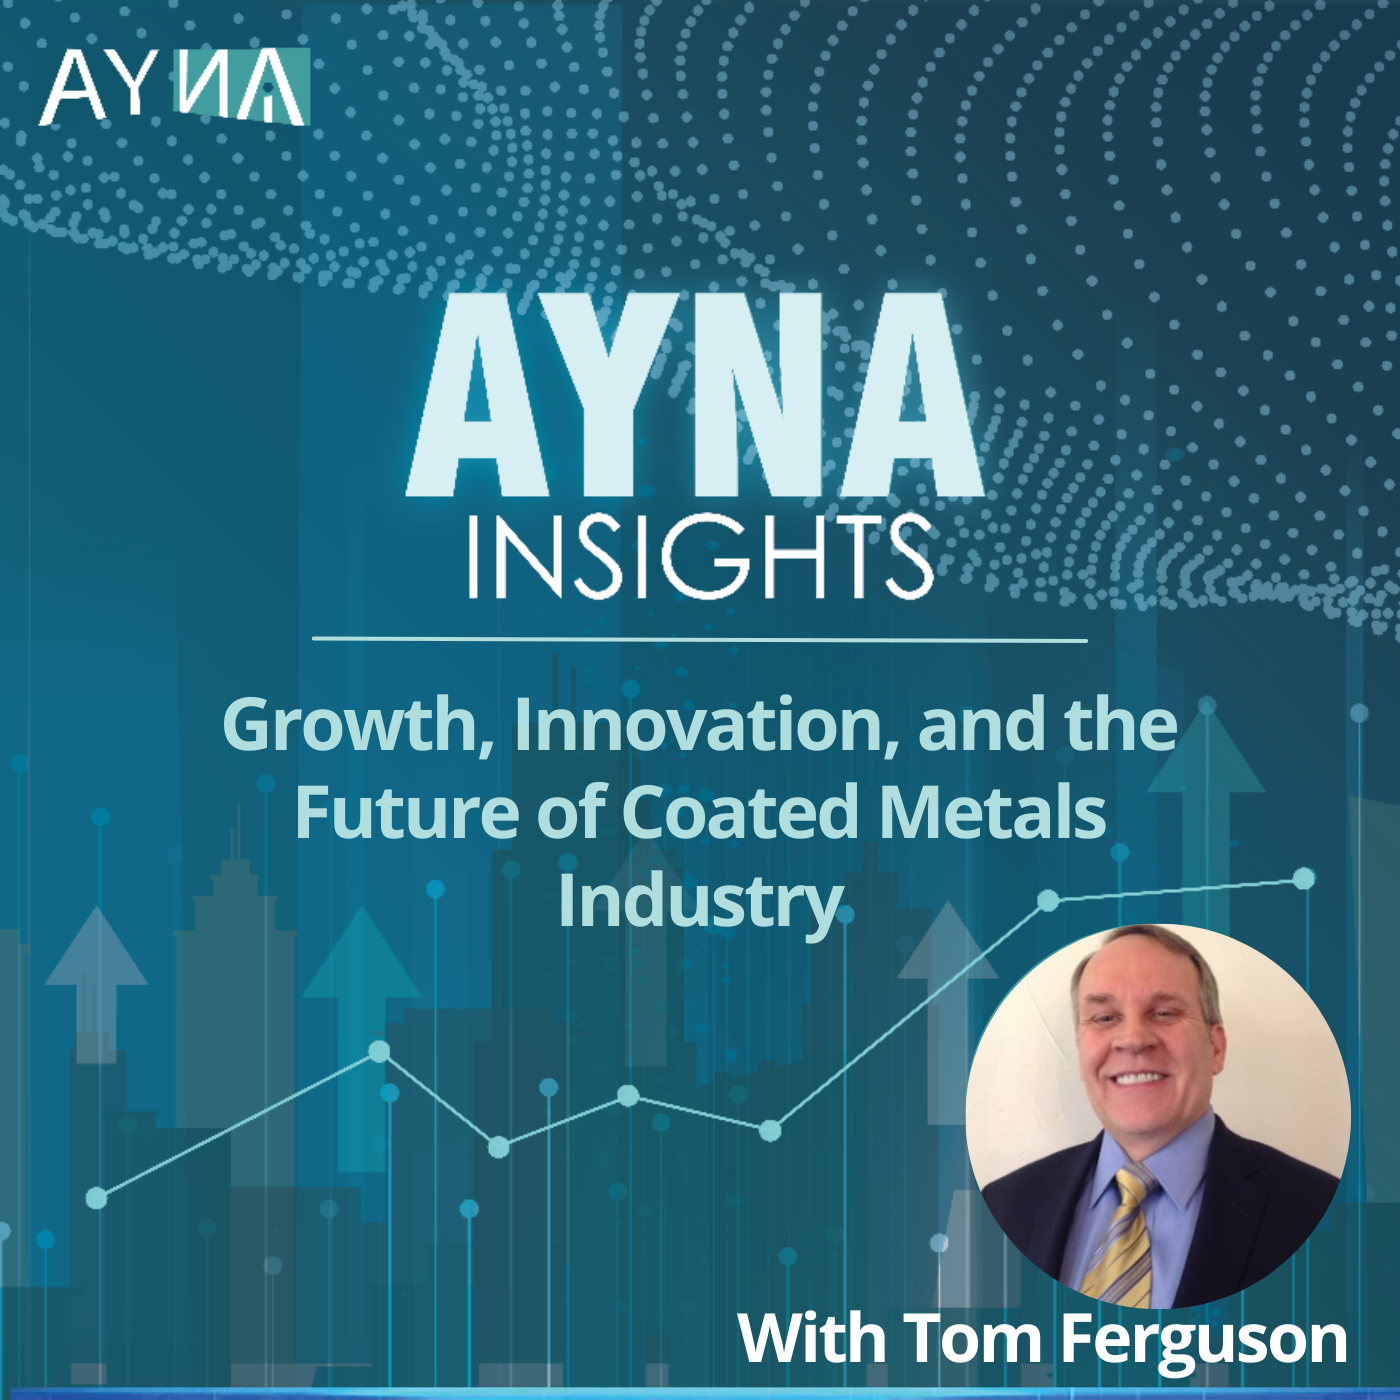 Tom Ferguson: Growth, Innovation, and the Future of Coated Metals Industry